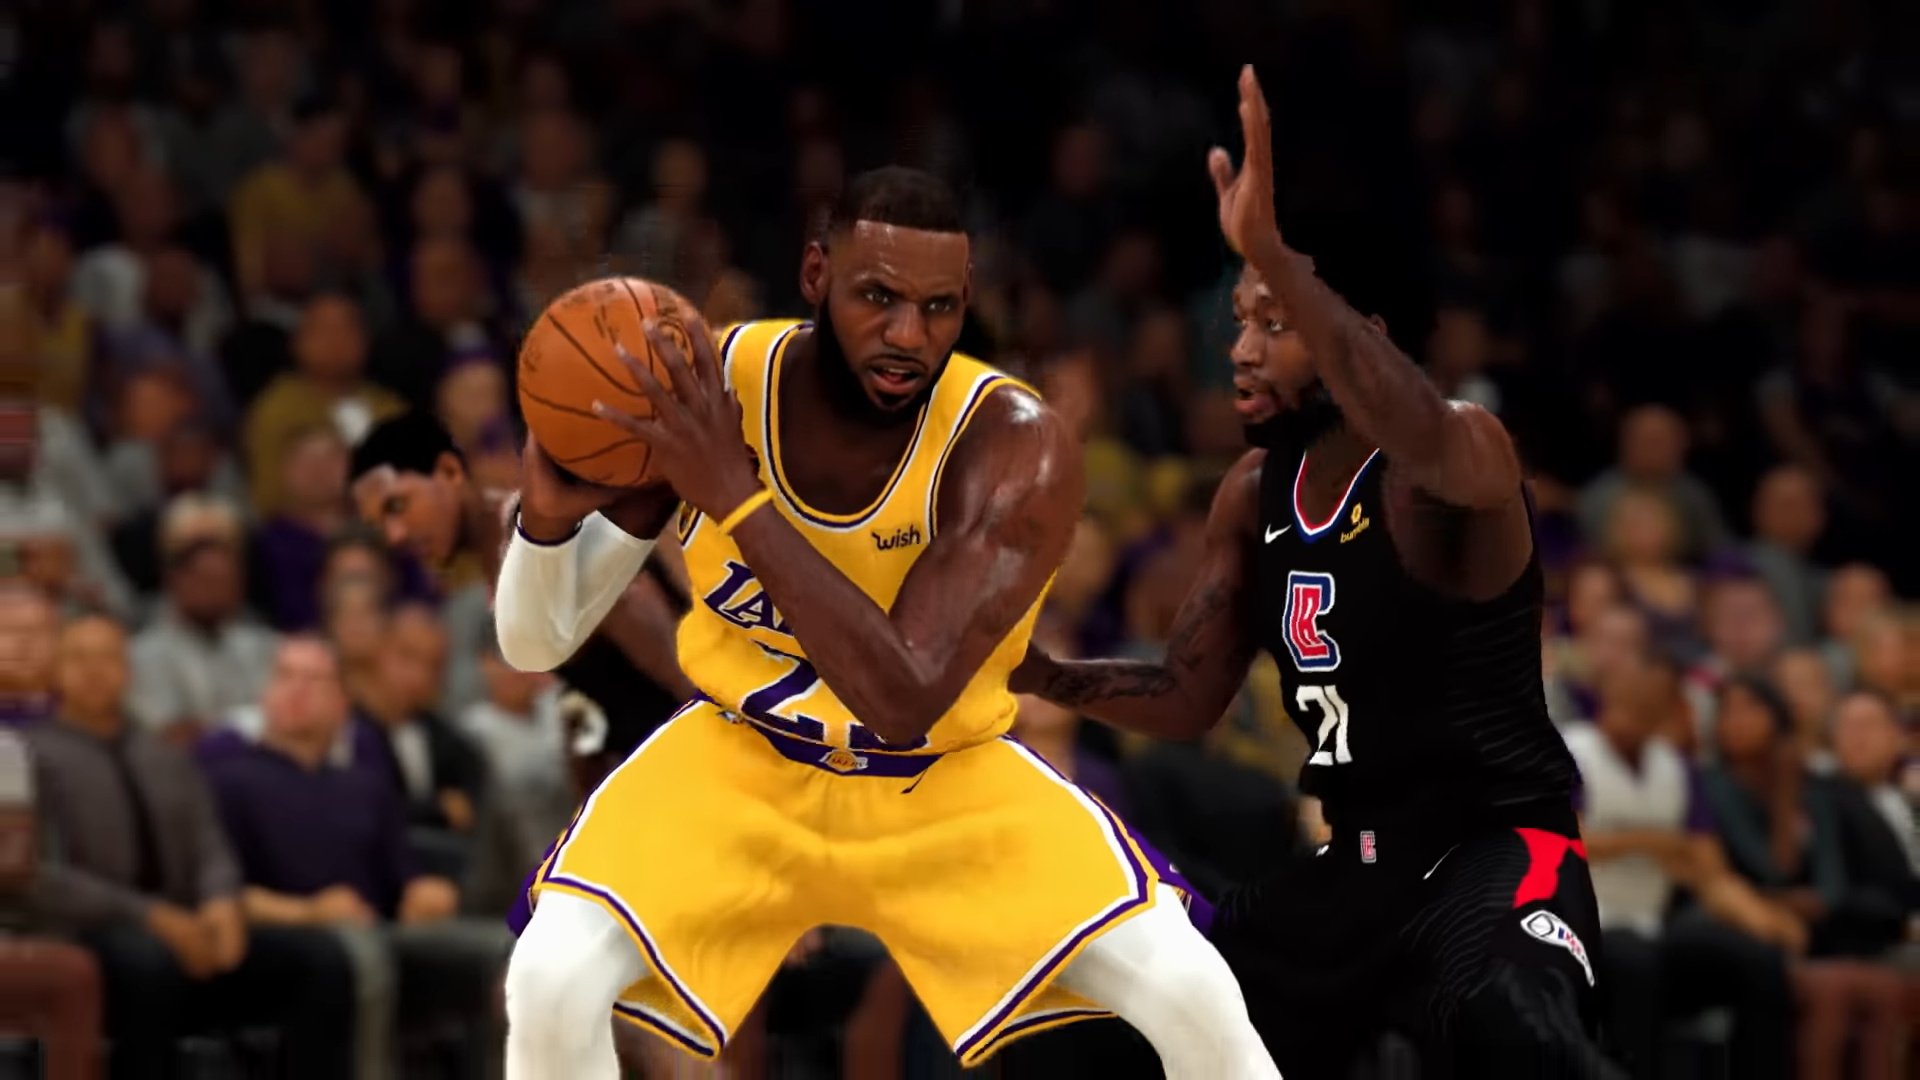 nba for playstation 4